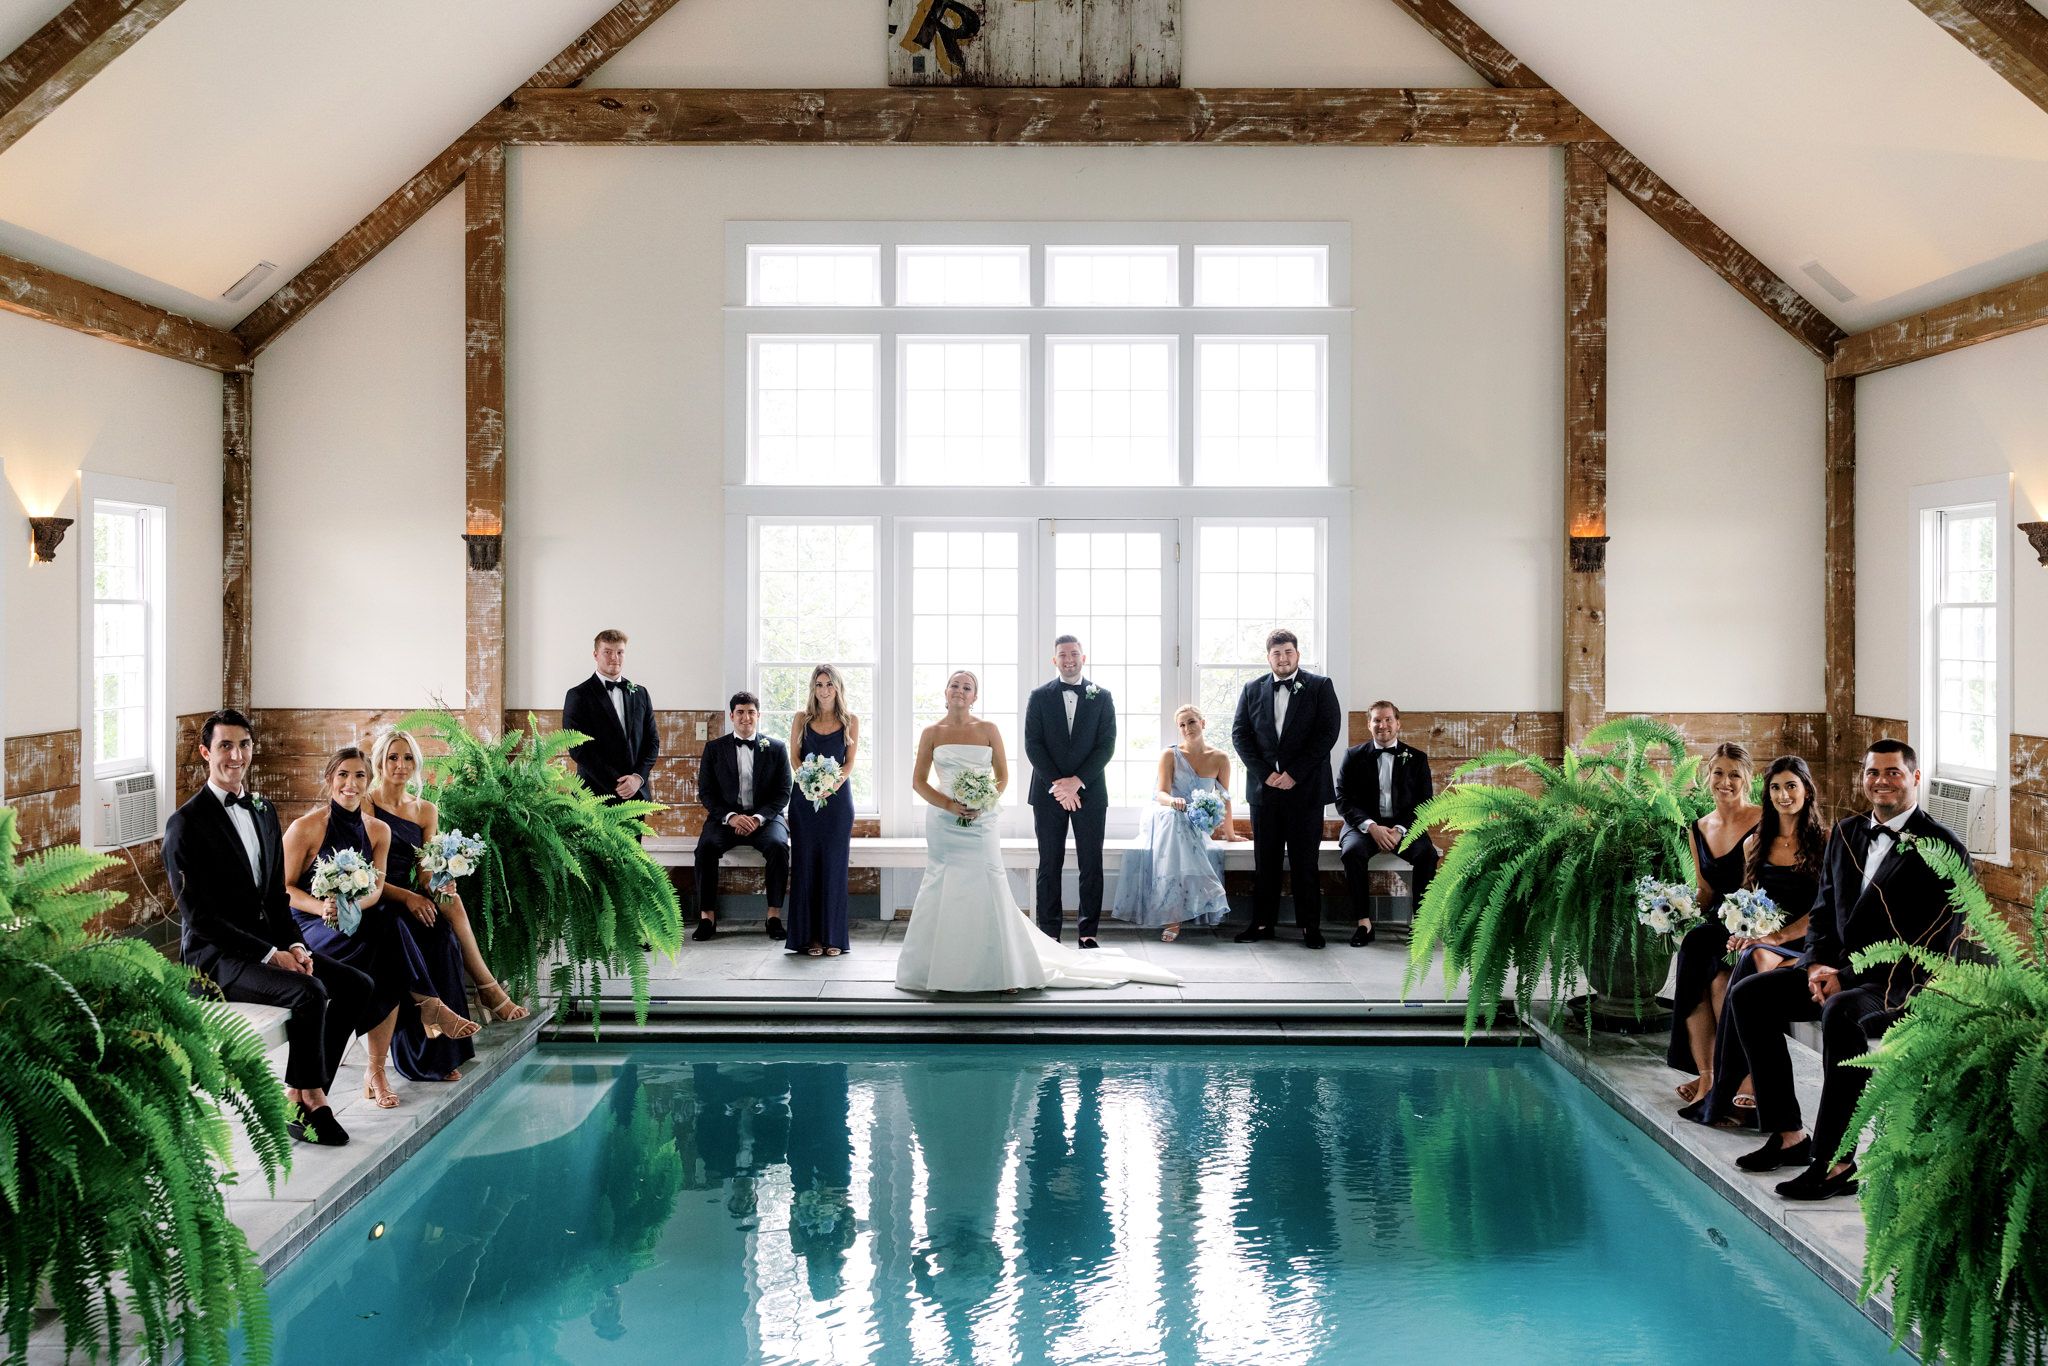 The bride, groom, groomsmen, and bridesmaids pose in a large hall with a swimming pool. Image by destination wedding photographer Jenny Fu